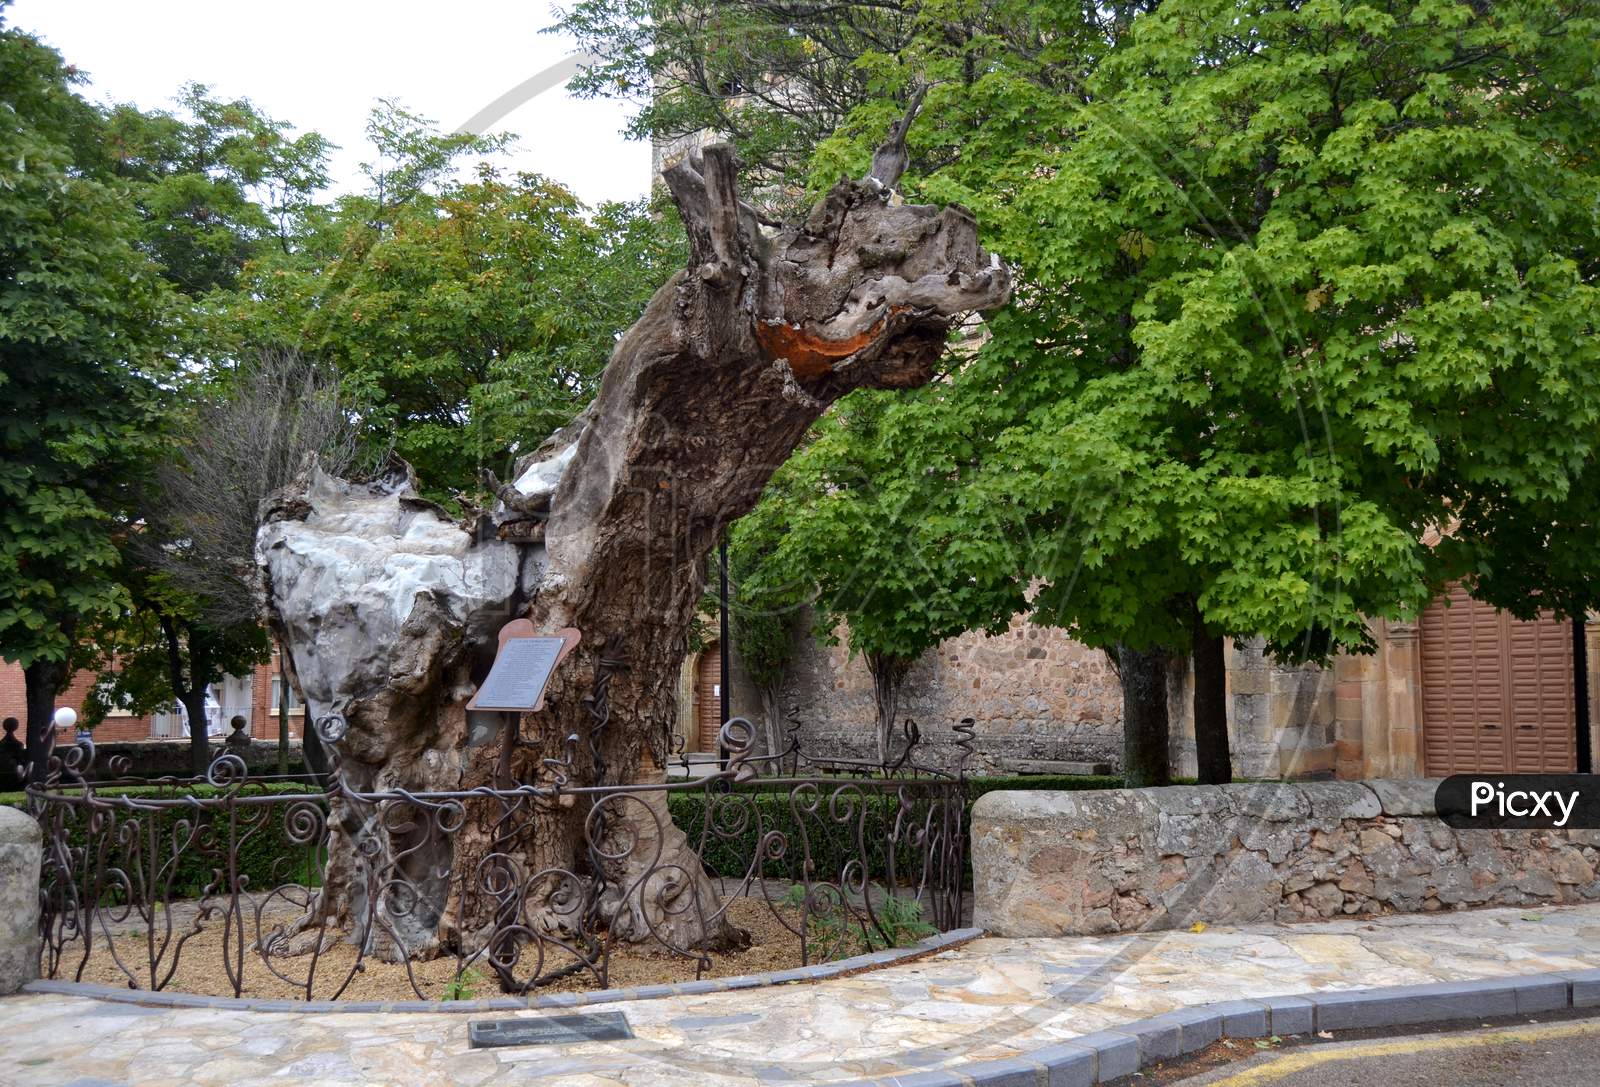 Monument In Homage To A Dry Elm Tree To Which The Writer Antonio Machado Dedicated A Poem